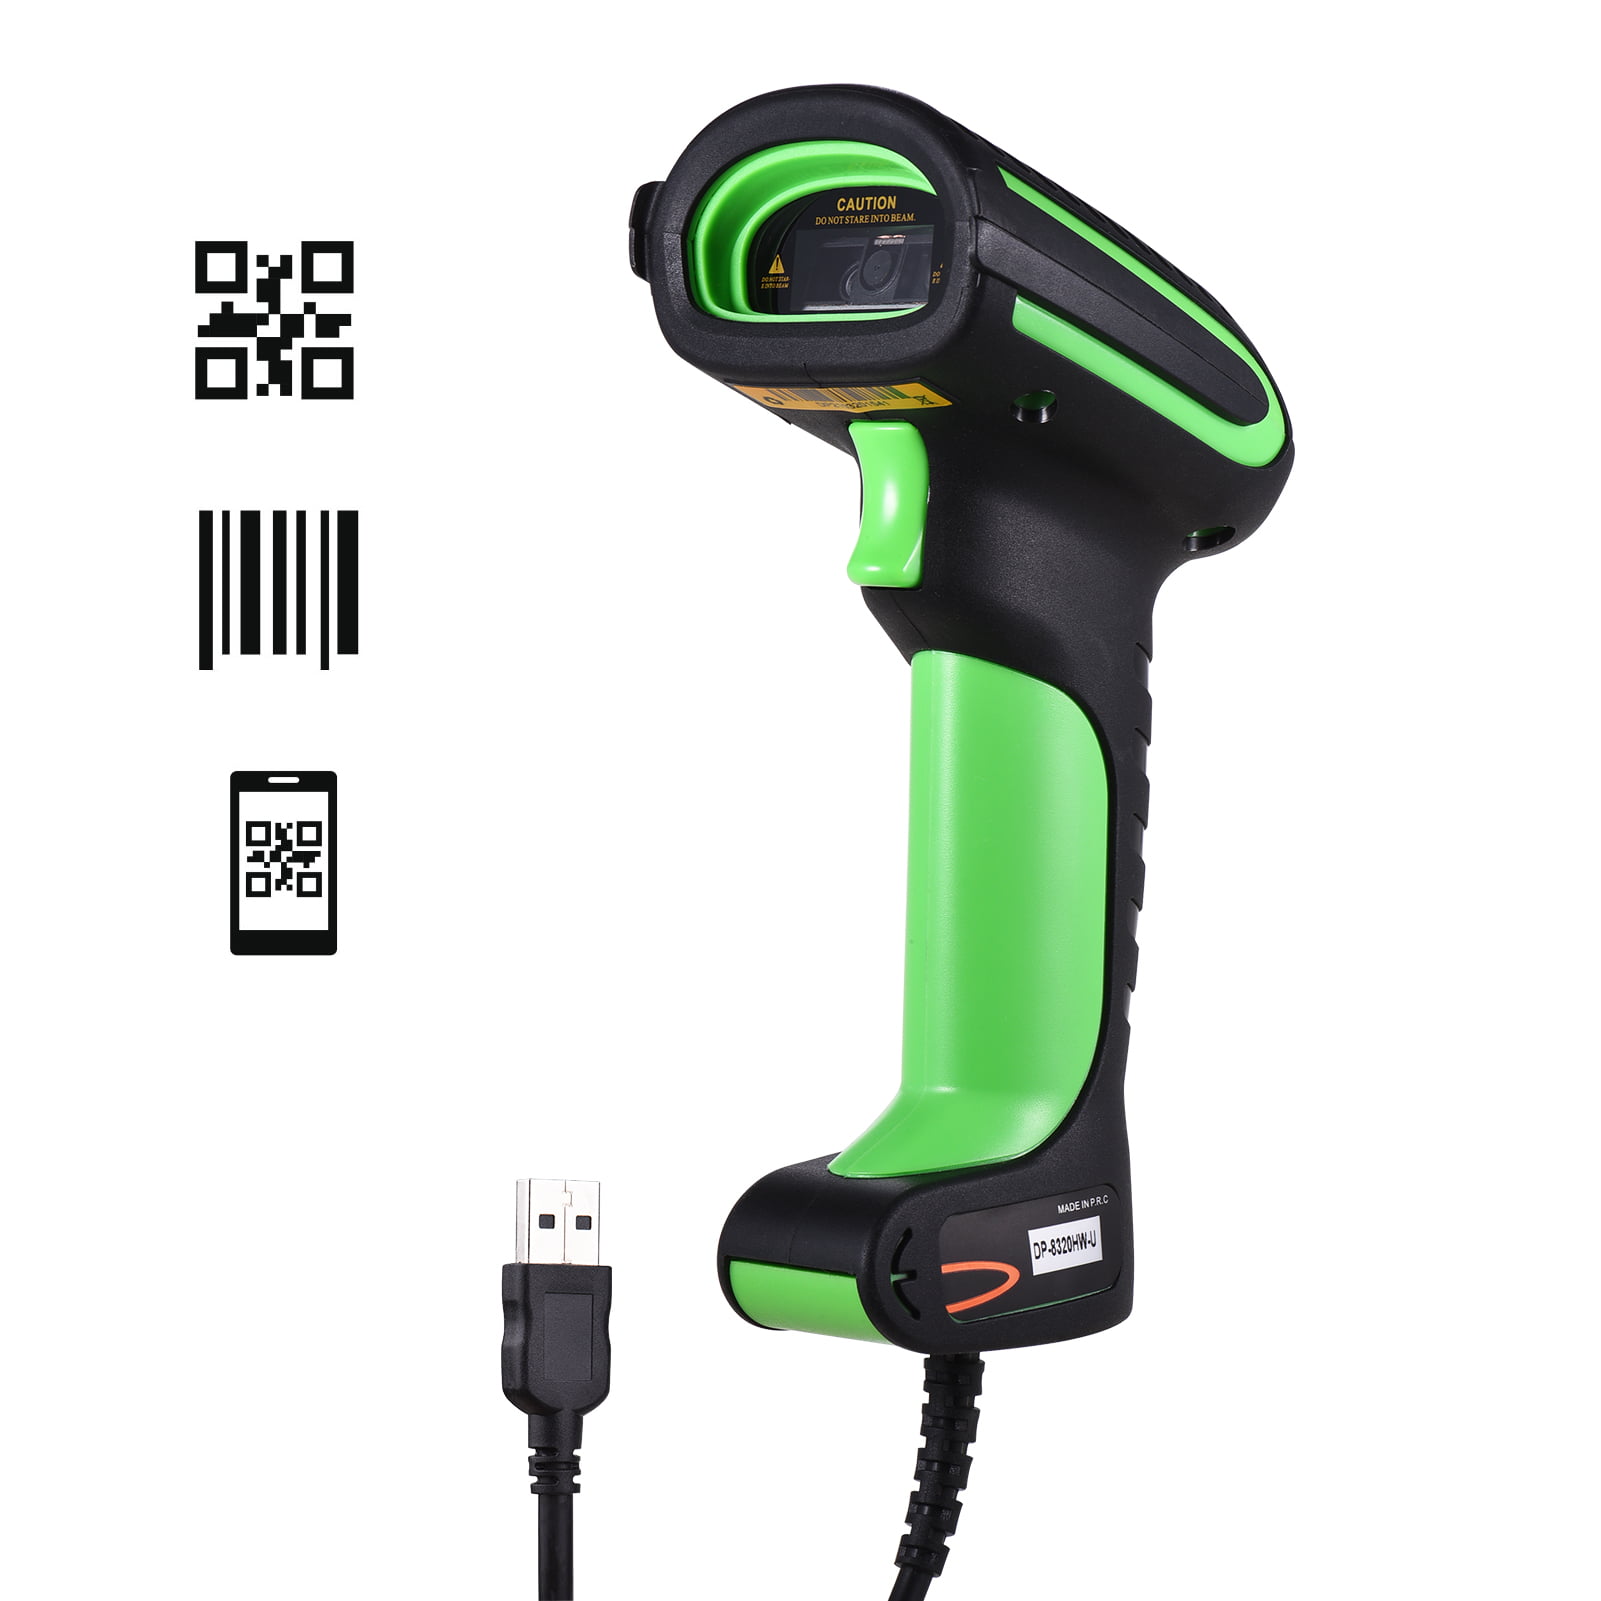 USB Handheld Wired Industry Sensor Barcode Scanner Automated 2D for MSI-Plessey 